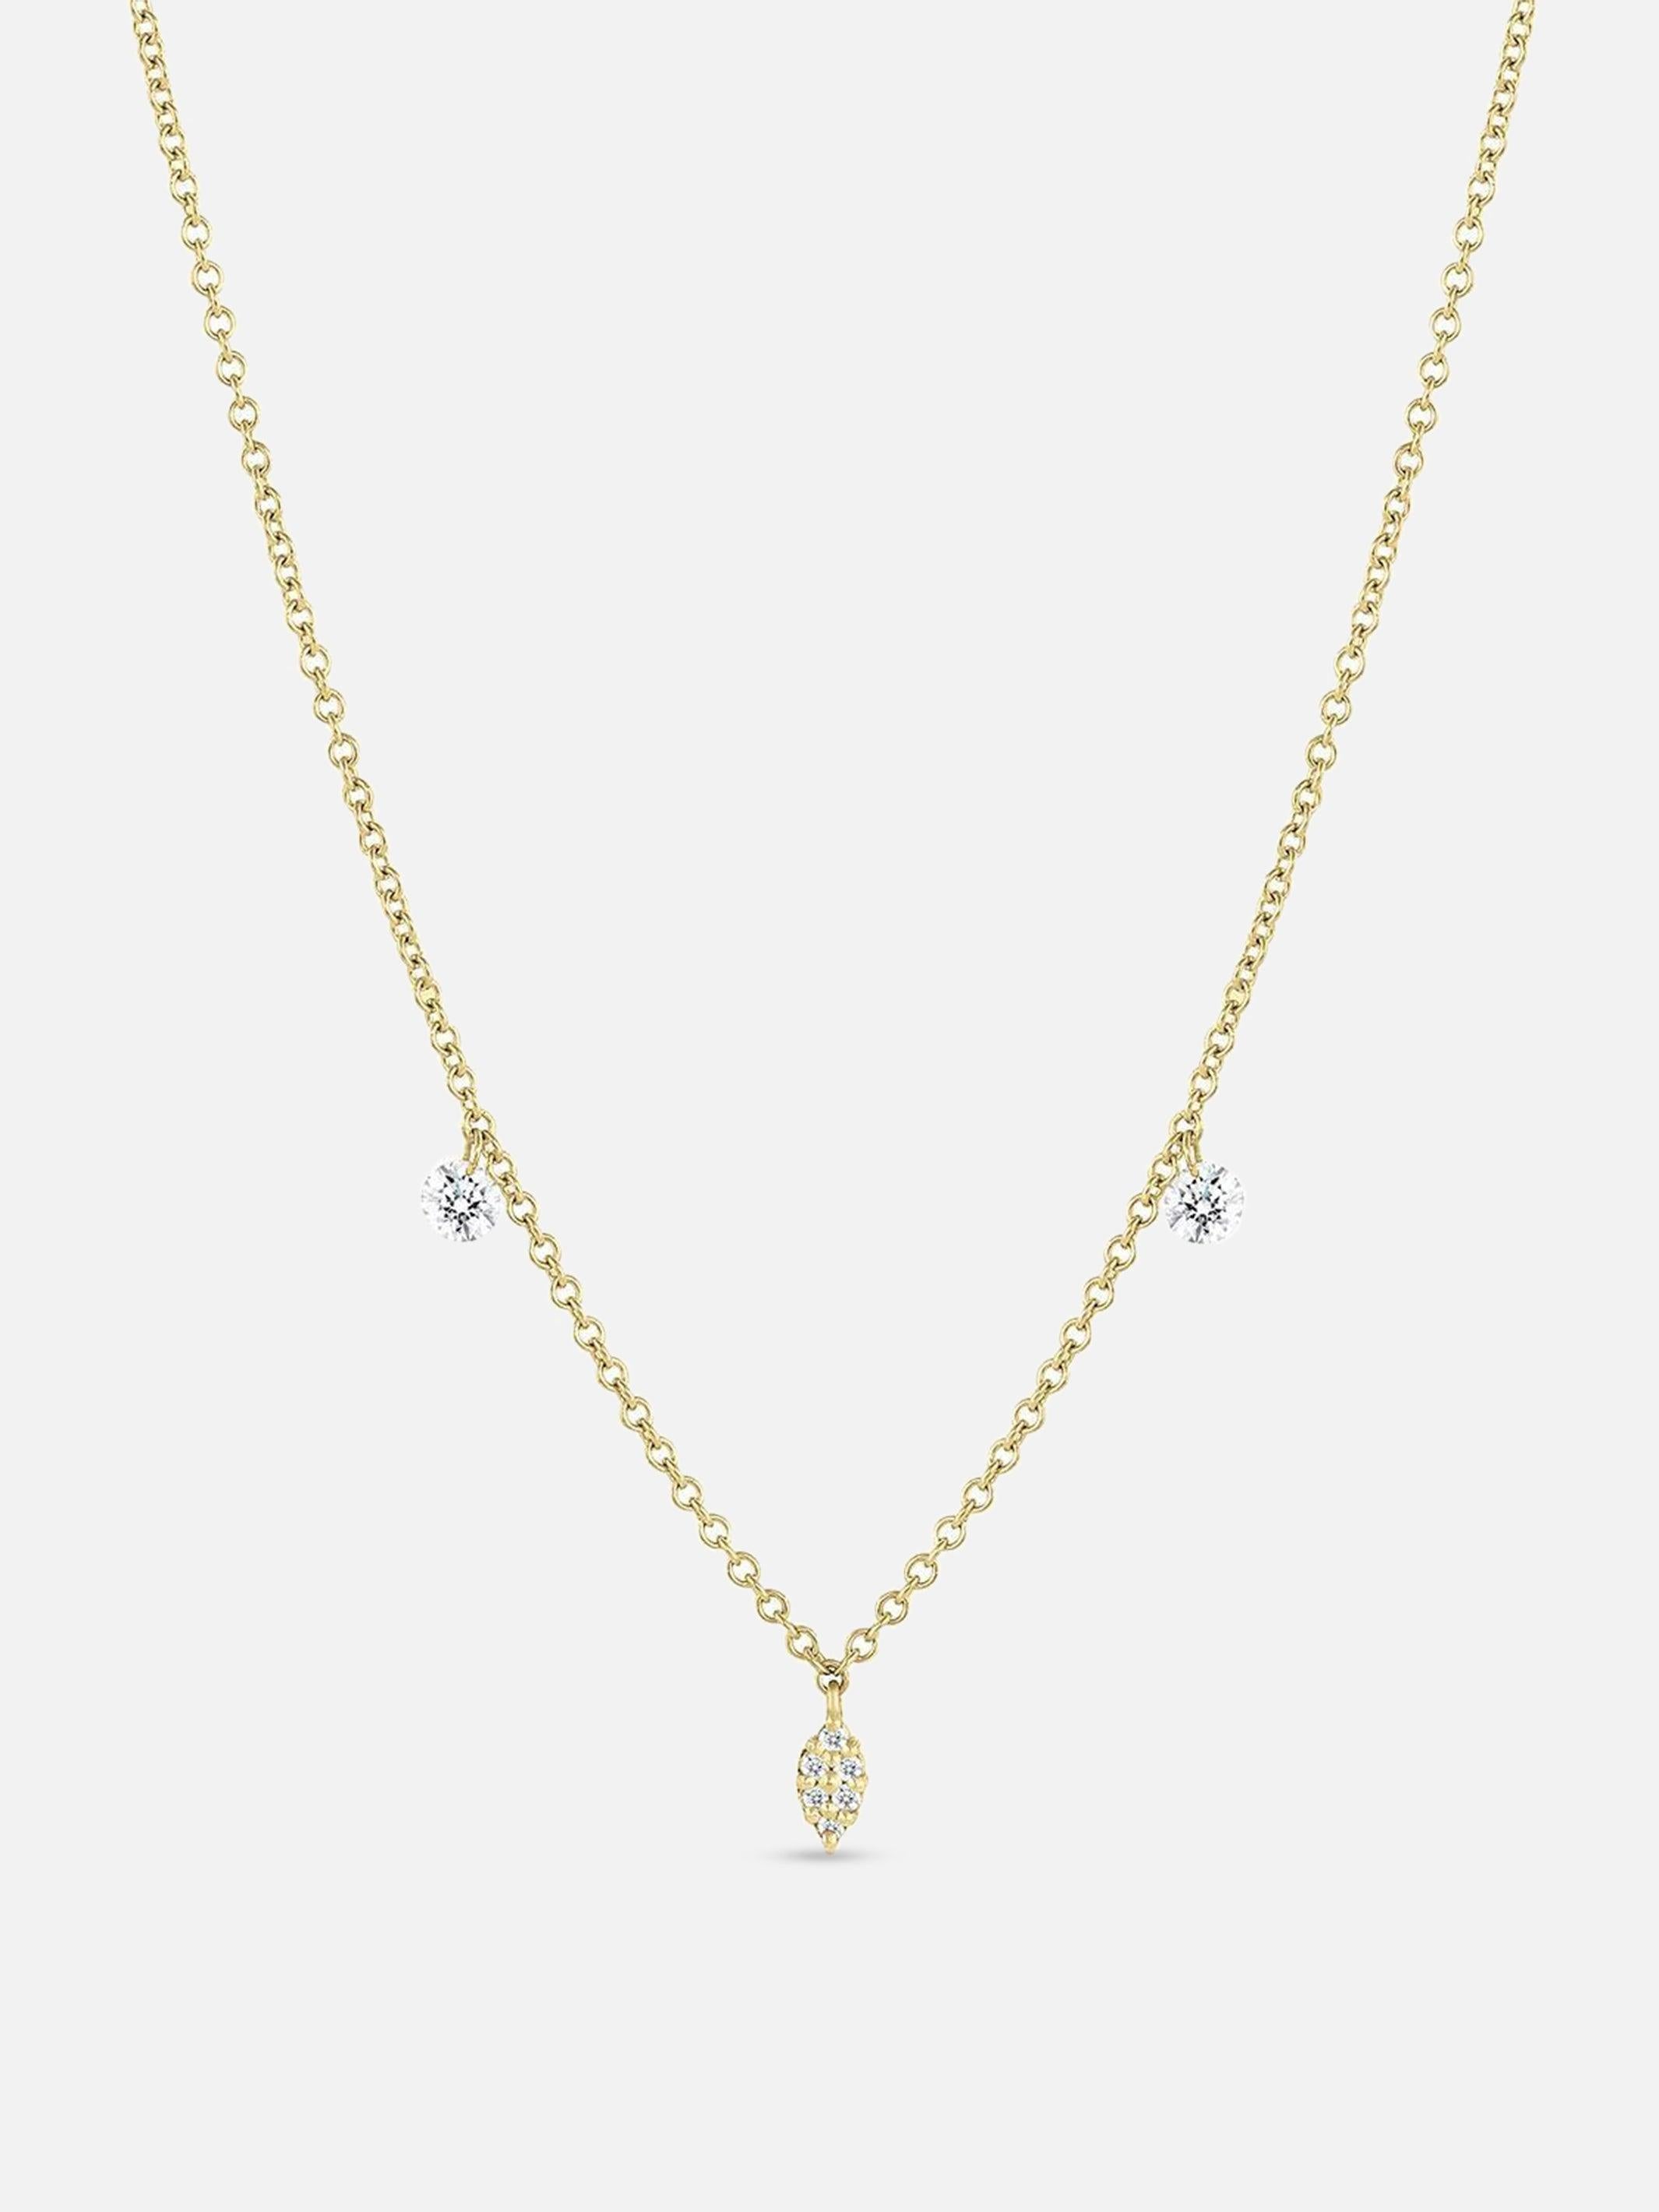 Meredith Young Floating Diamond Charm Necklace 1